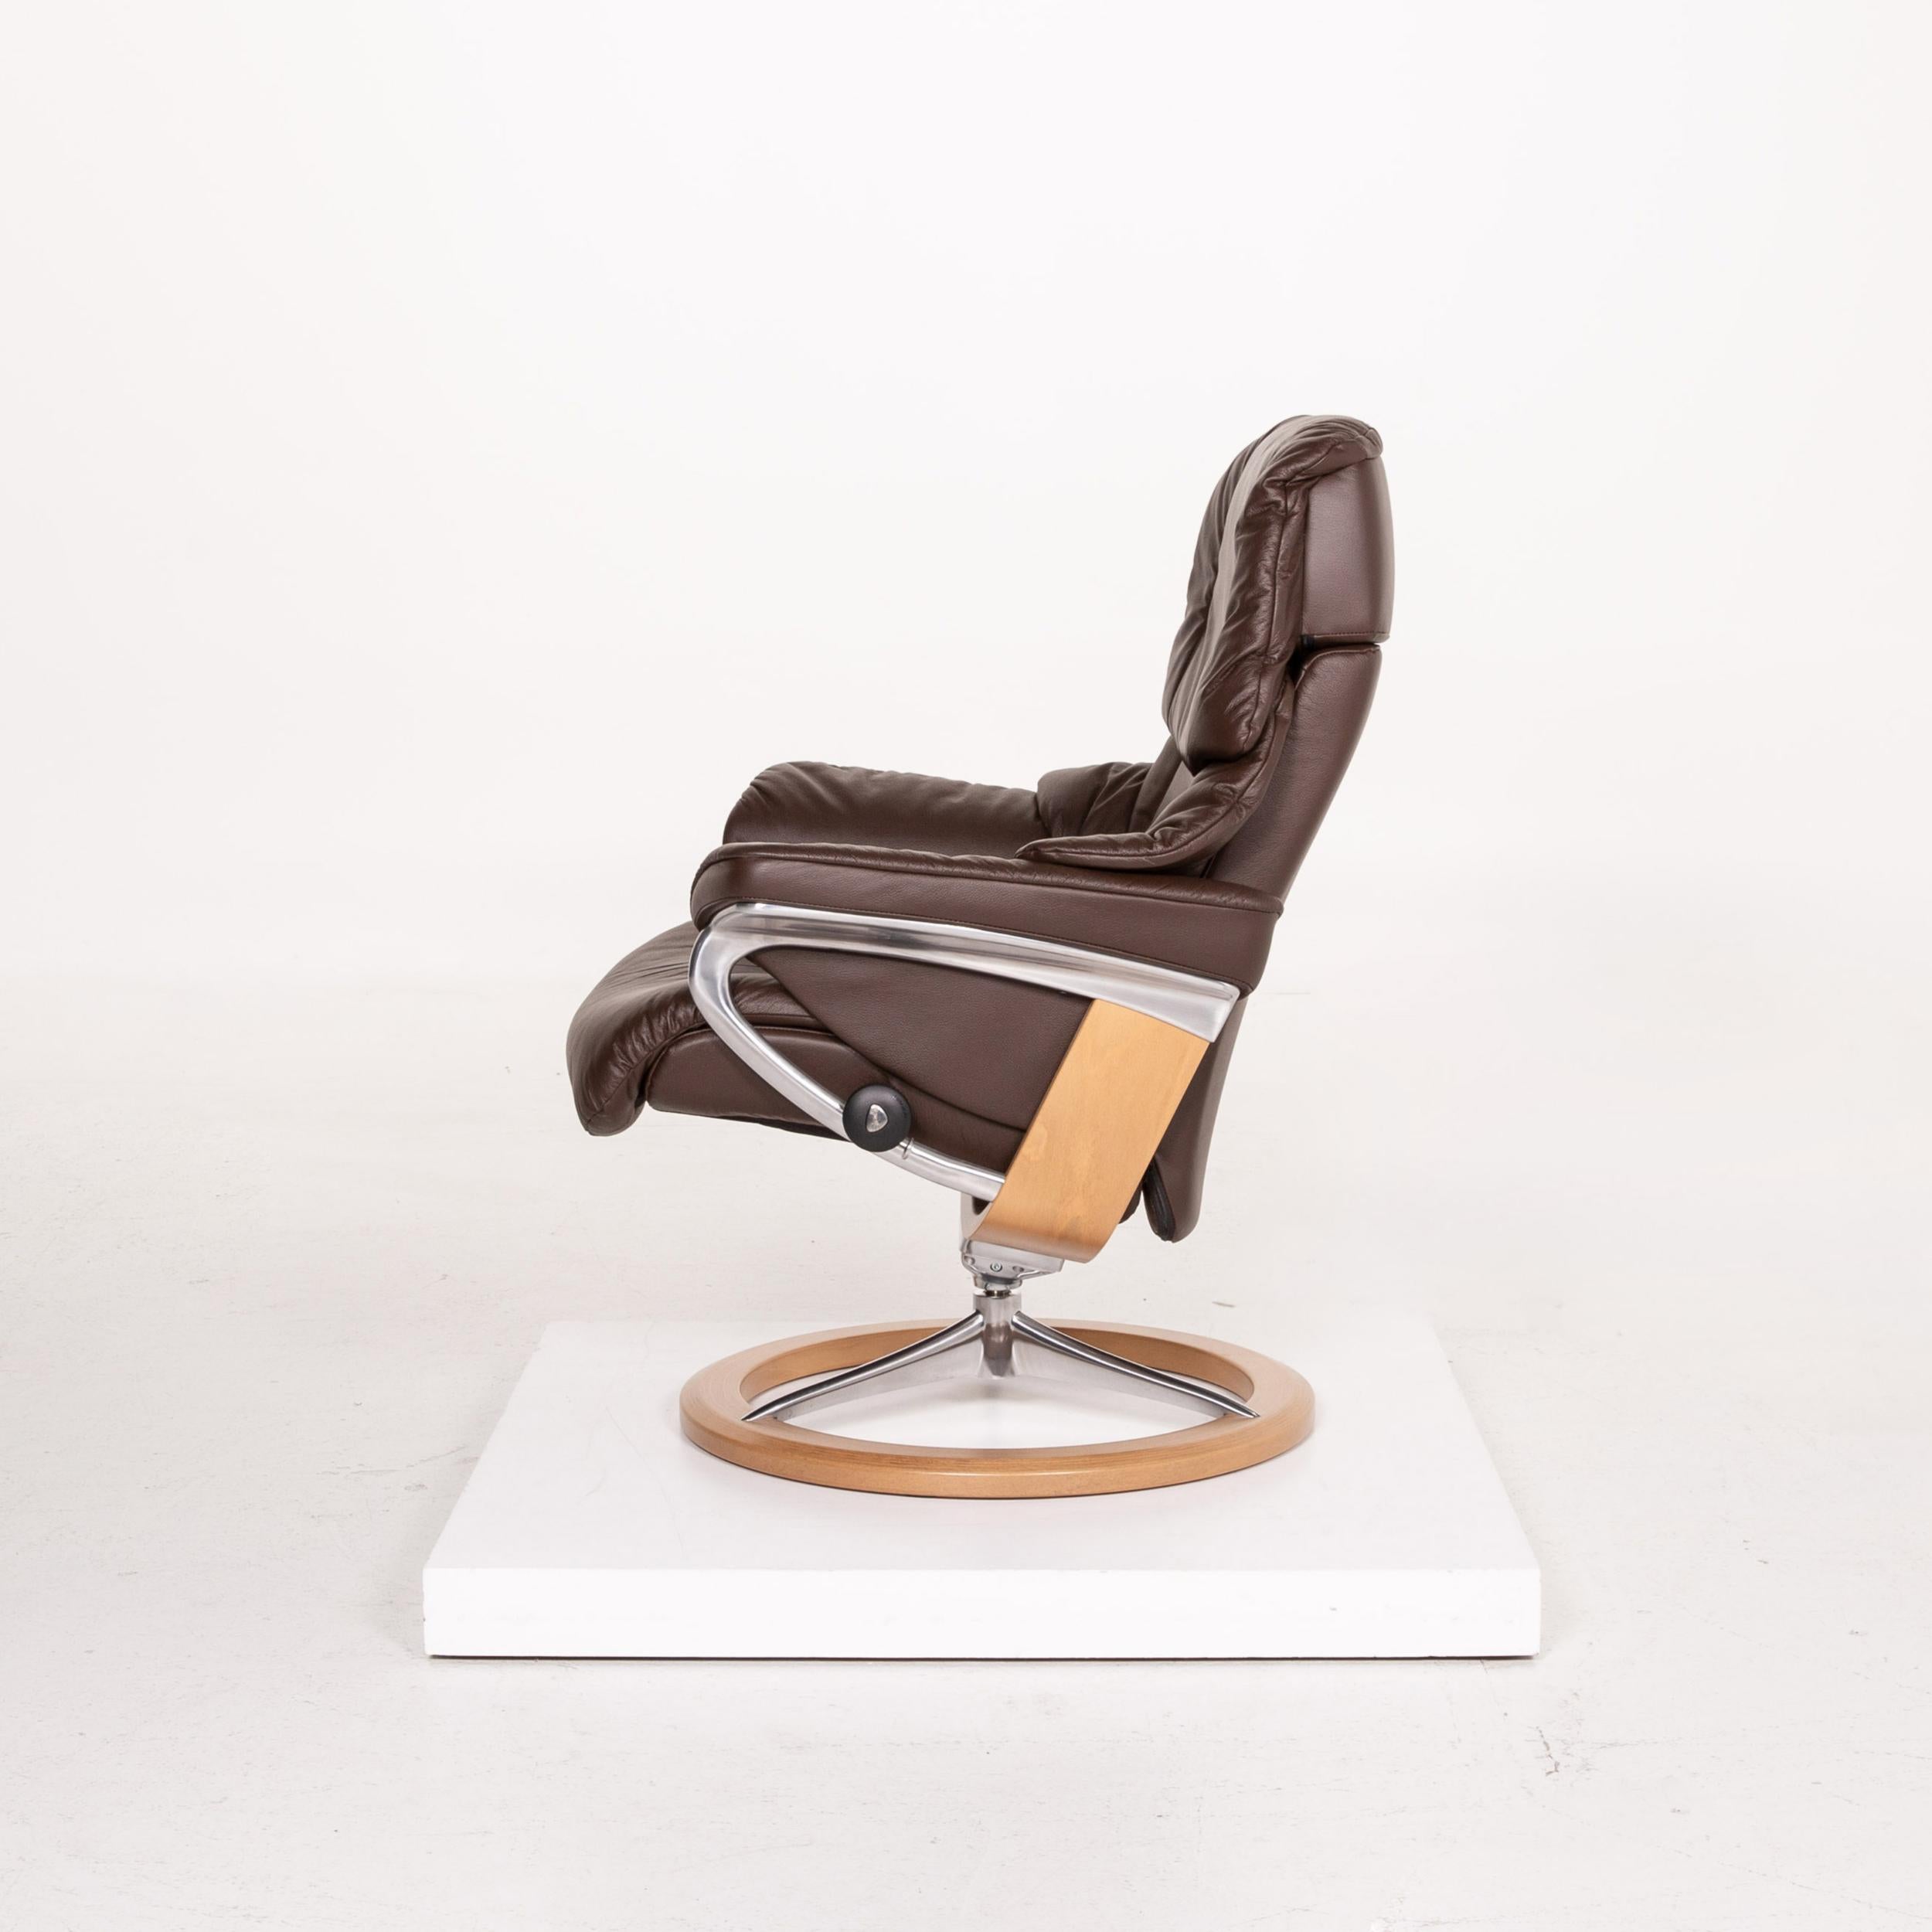 Stressless Reno Leather Armchair Incl. Stool Dark Brown Brown Relaxation 8